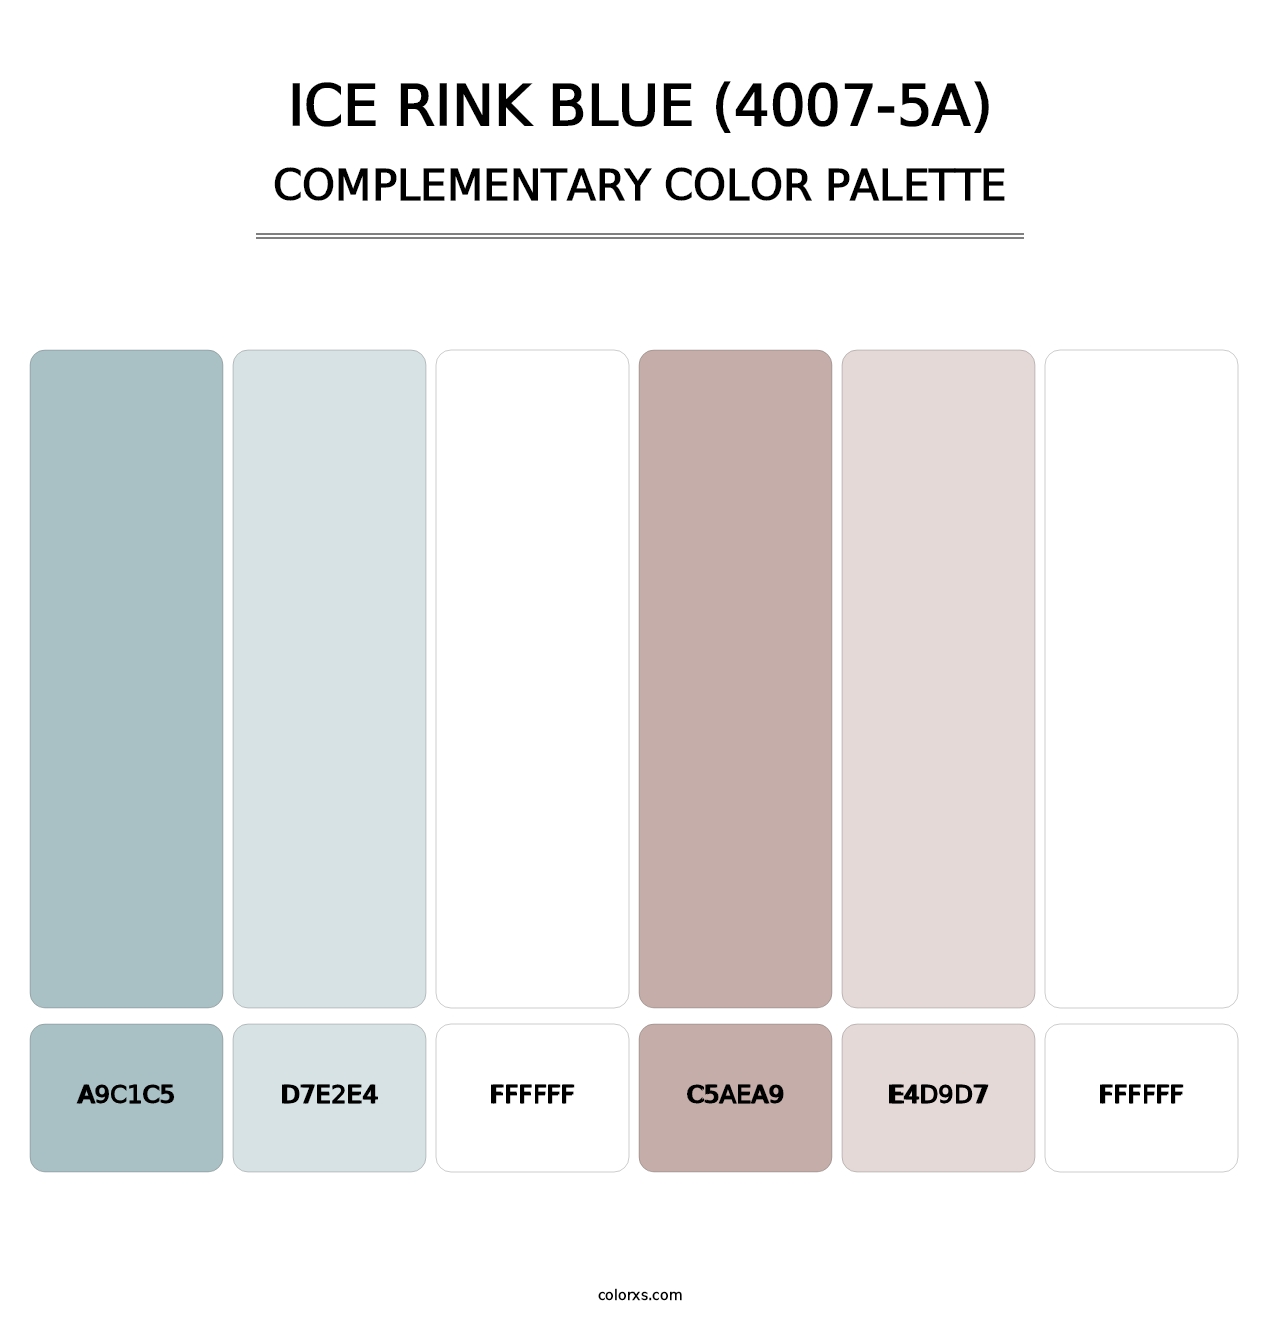 Ice Rink Blue (4007-5A) - Complementary Color Palette